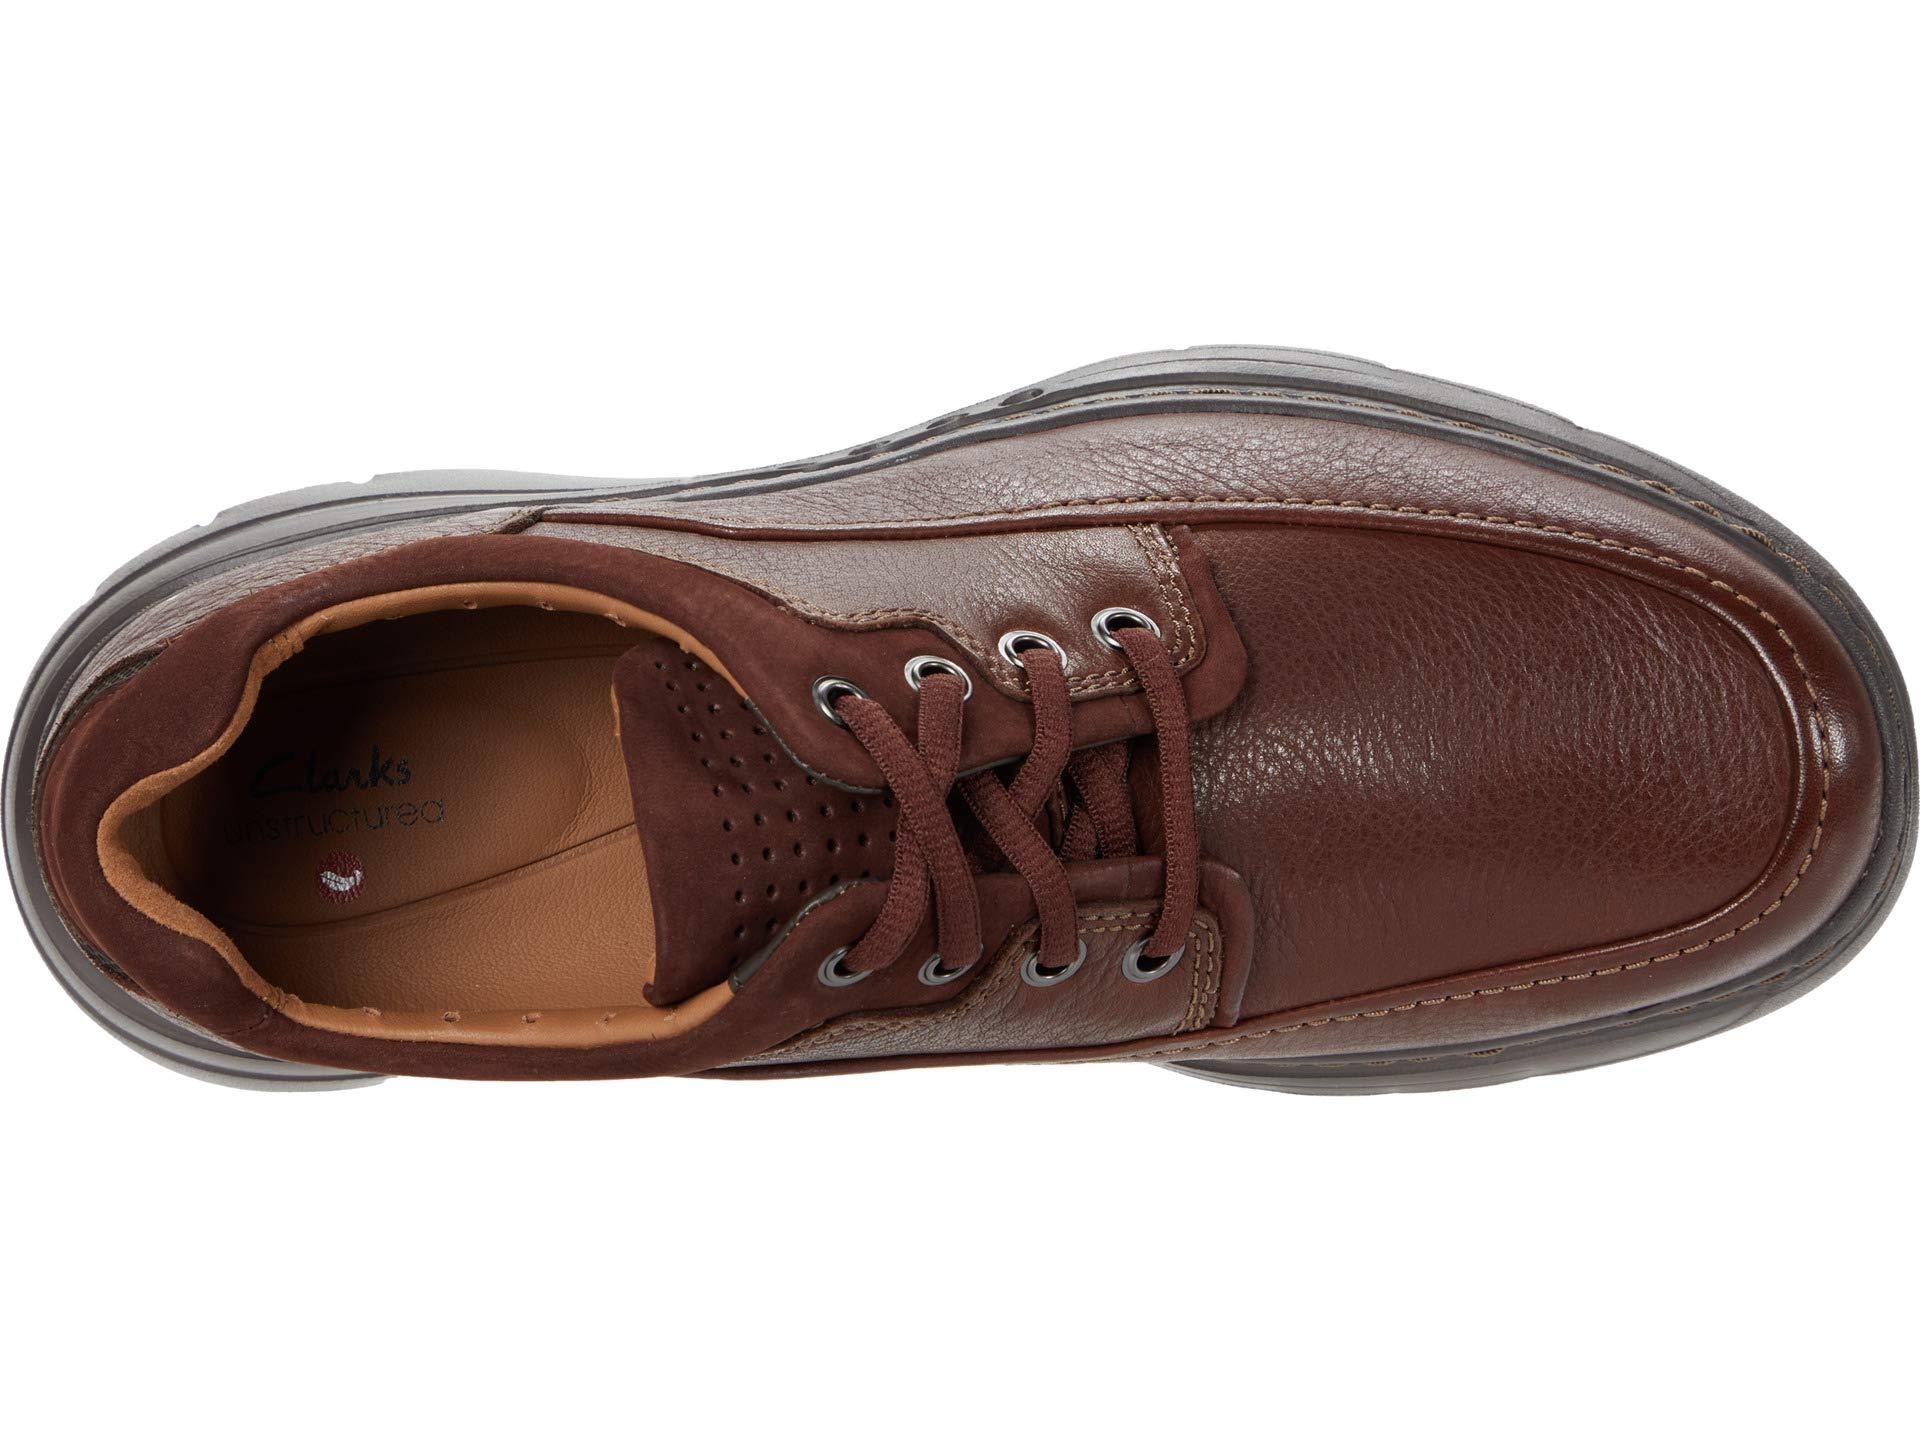 Clarks Un Brawley Lace in Mahogany (Brown) for Men - Lyst